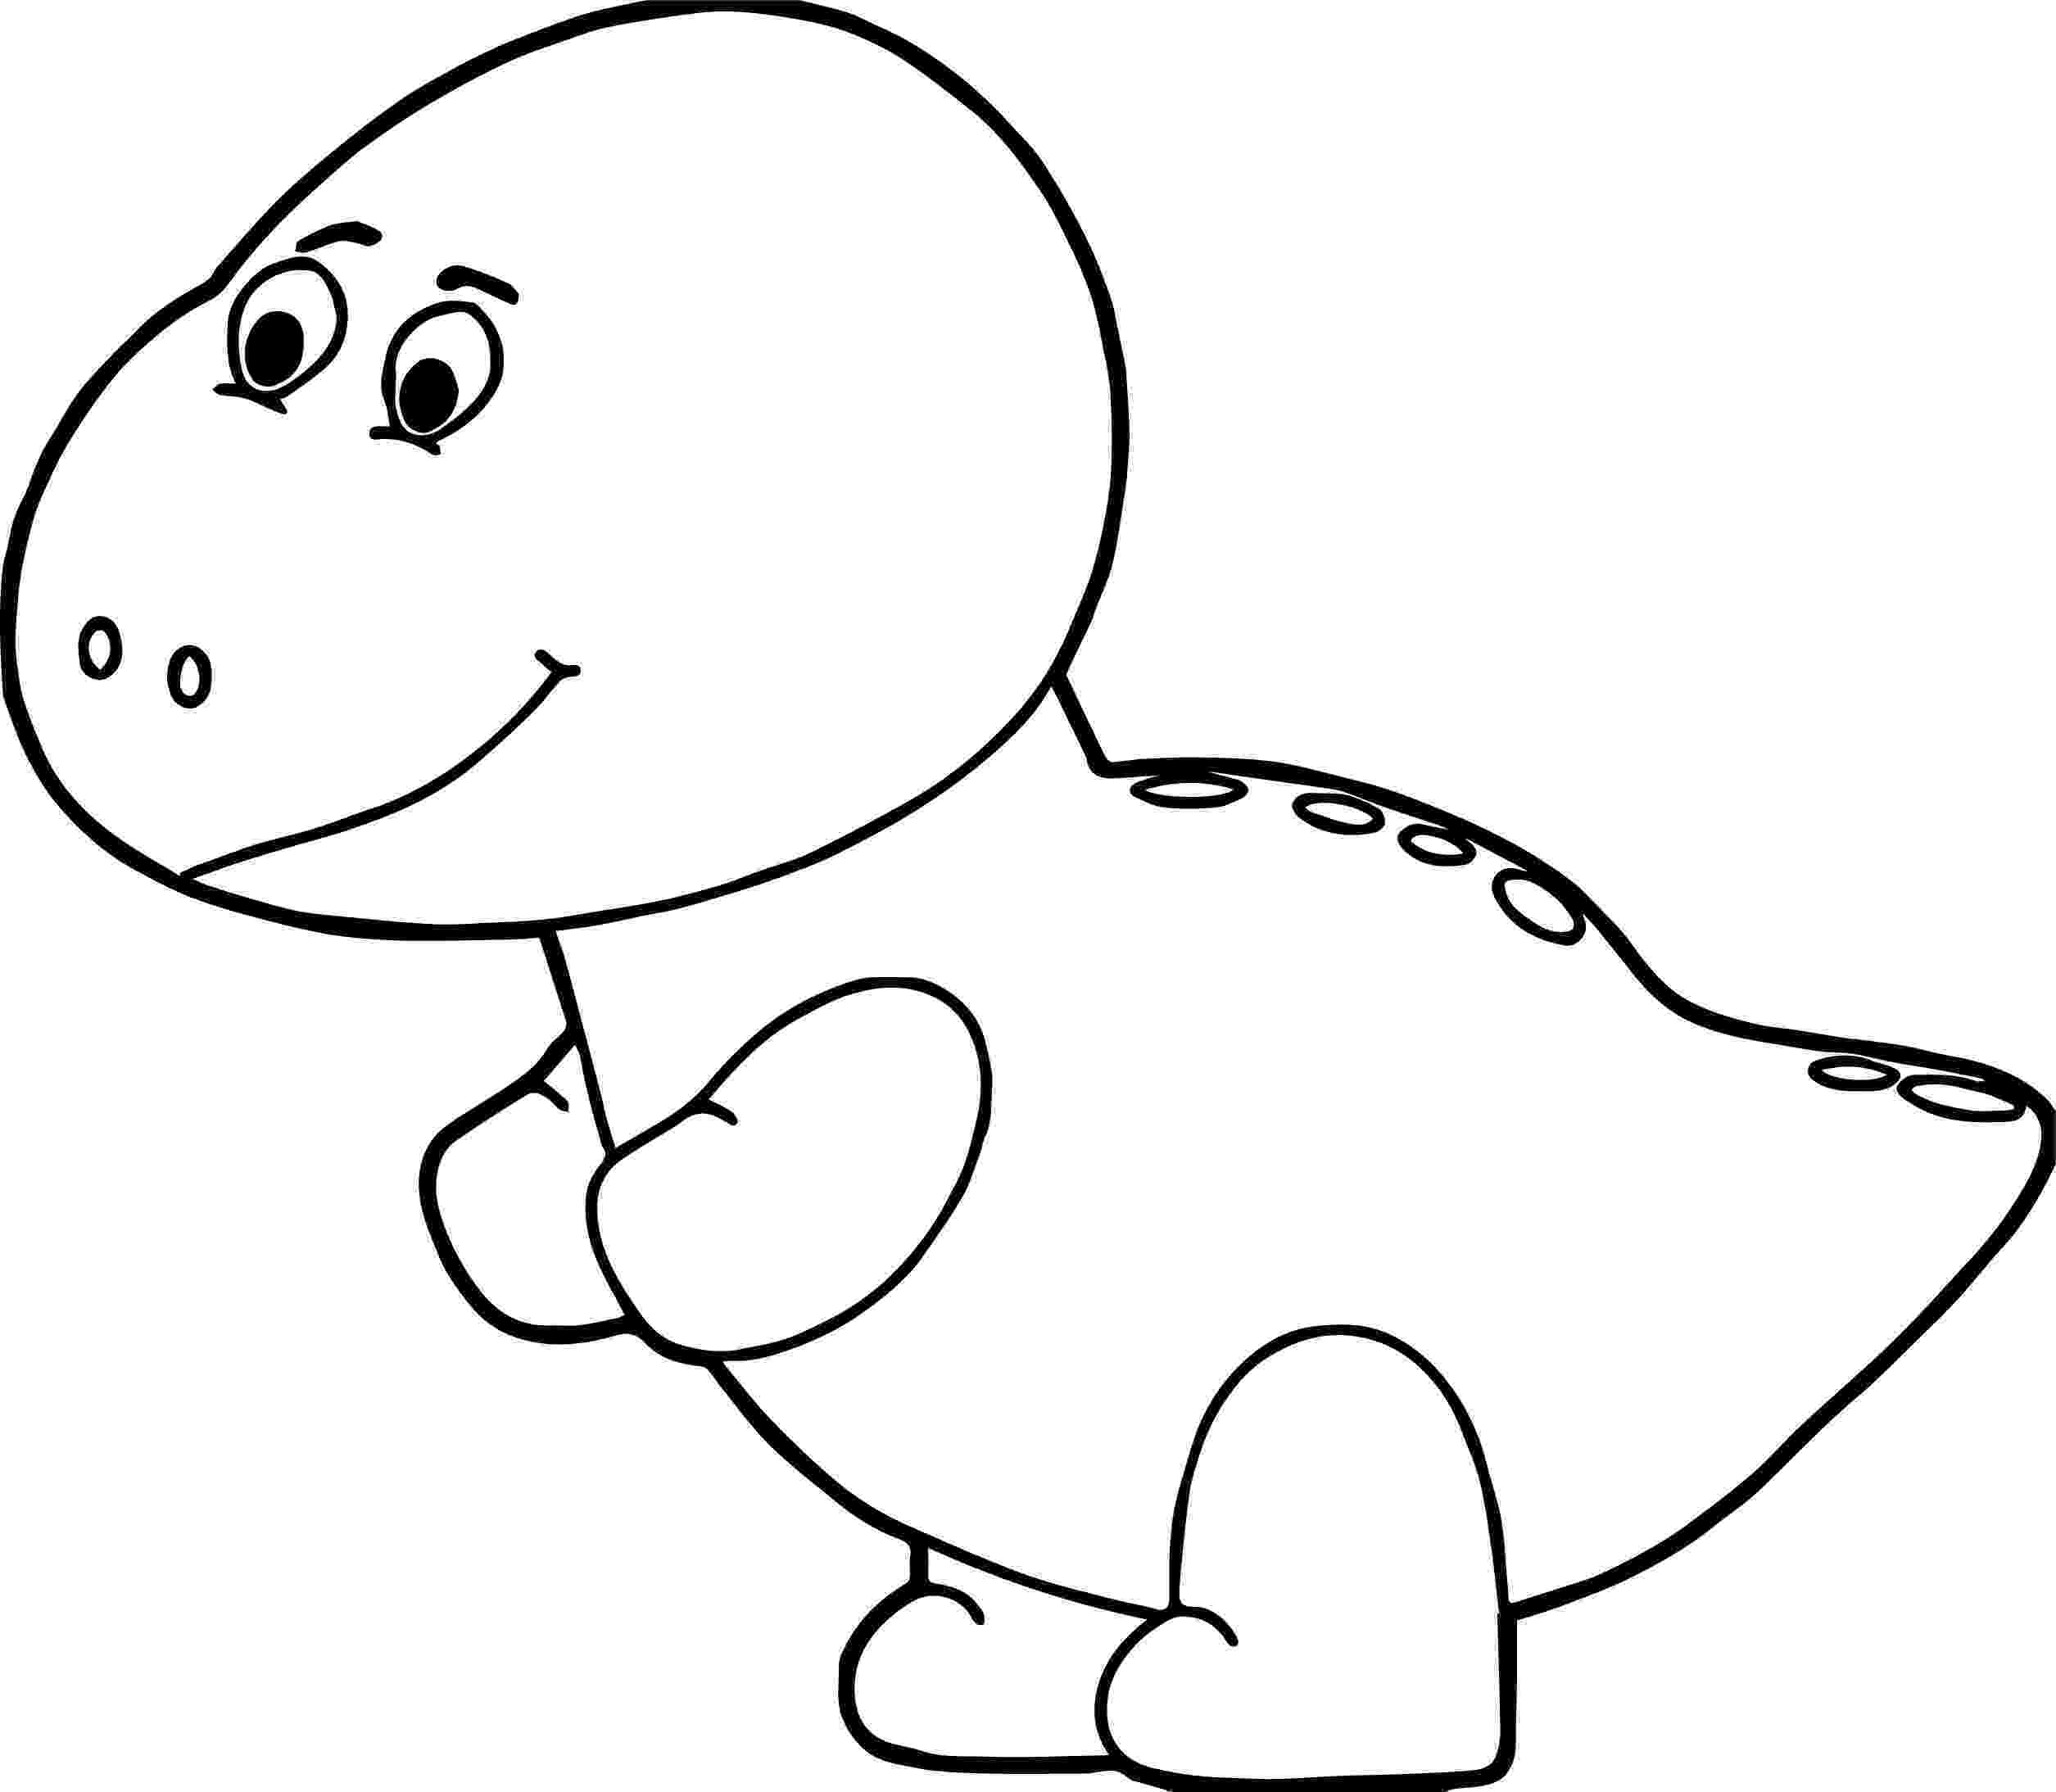 dinosaur egg coloring page cute little dinosaur hatching from egg coloring page egg dinosaur coloring page 